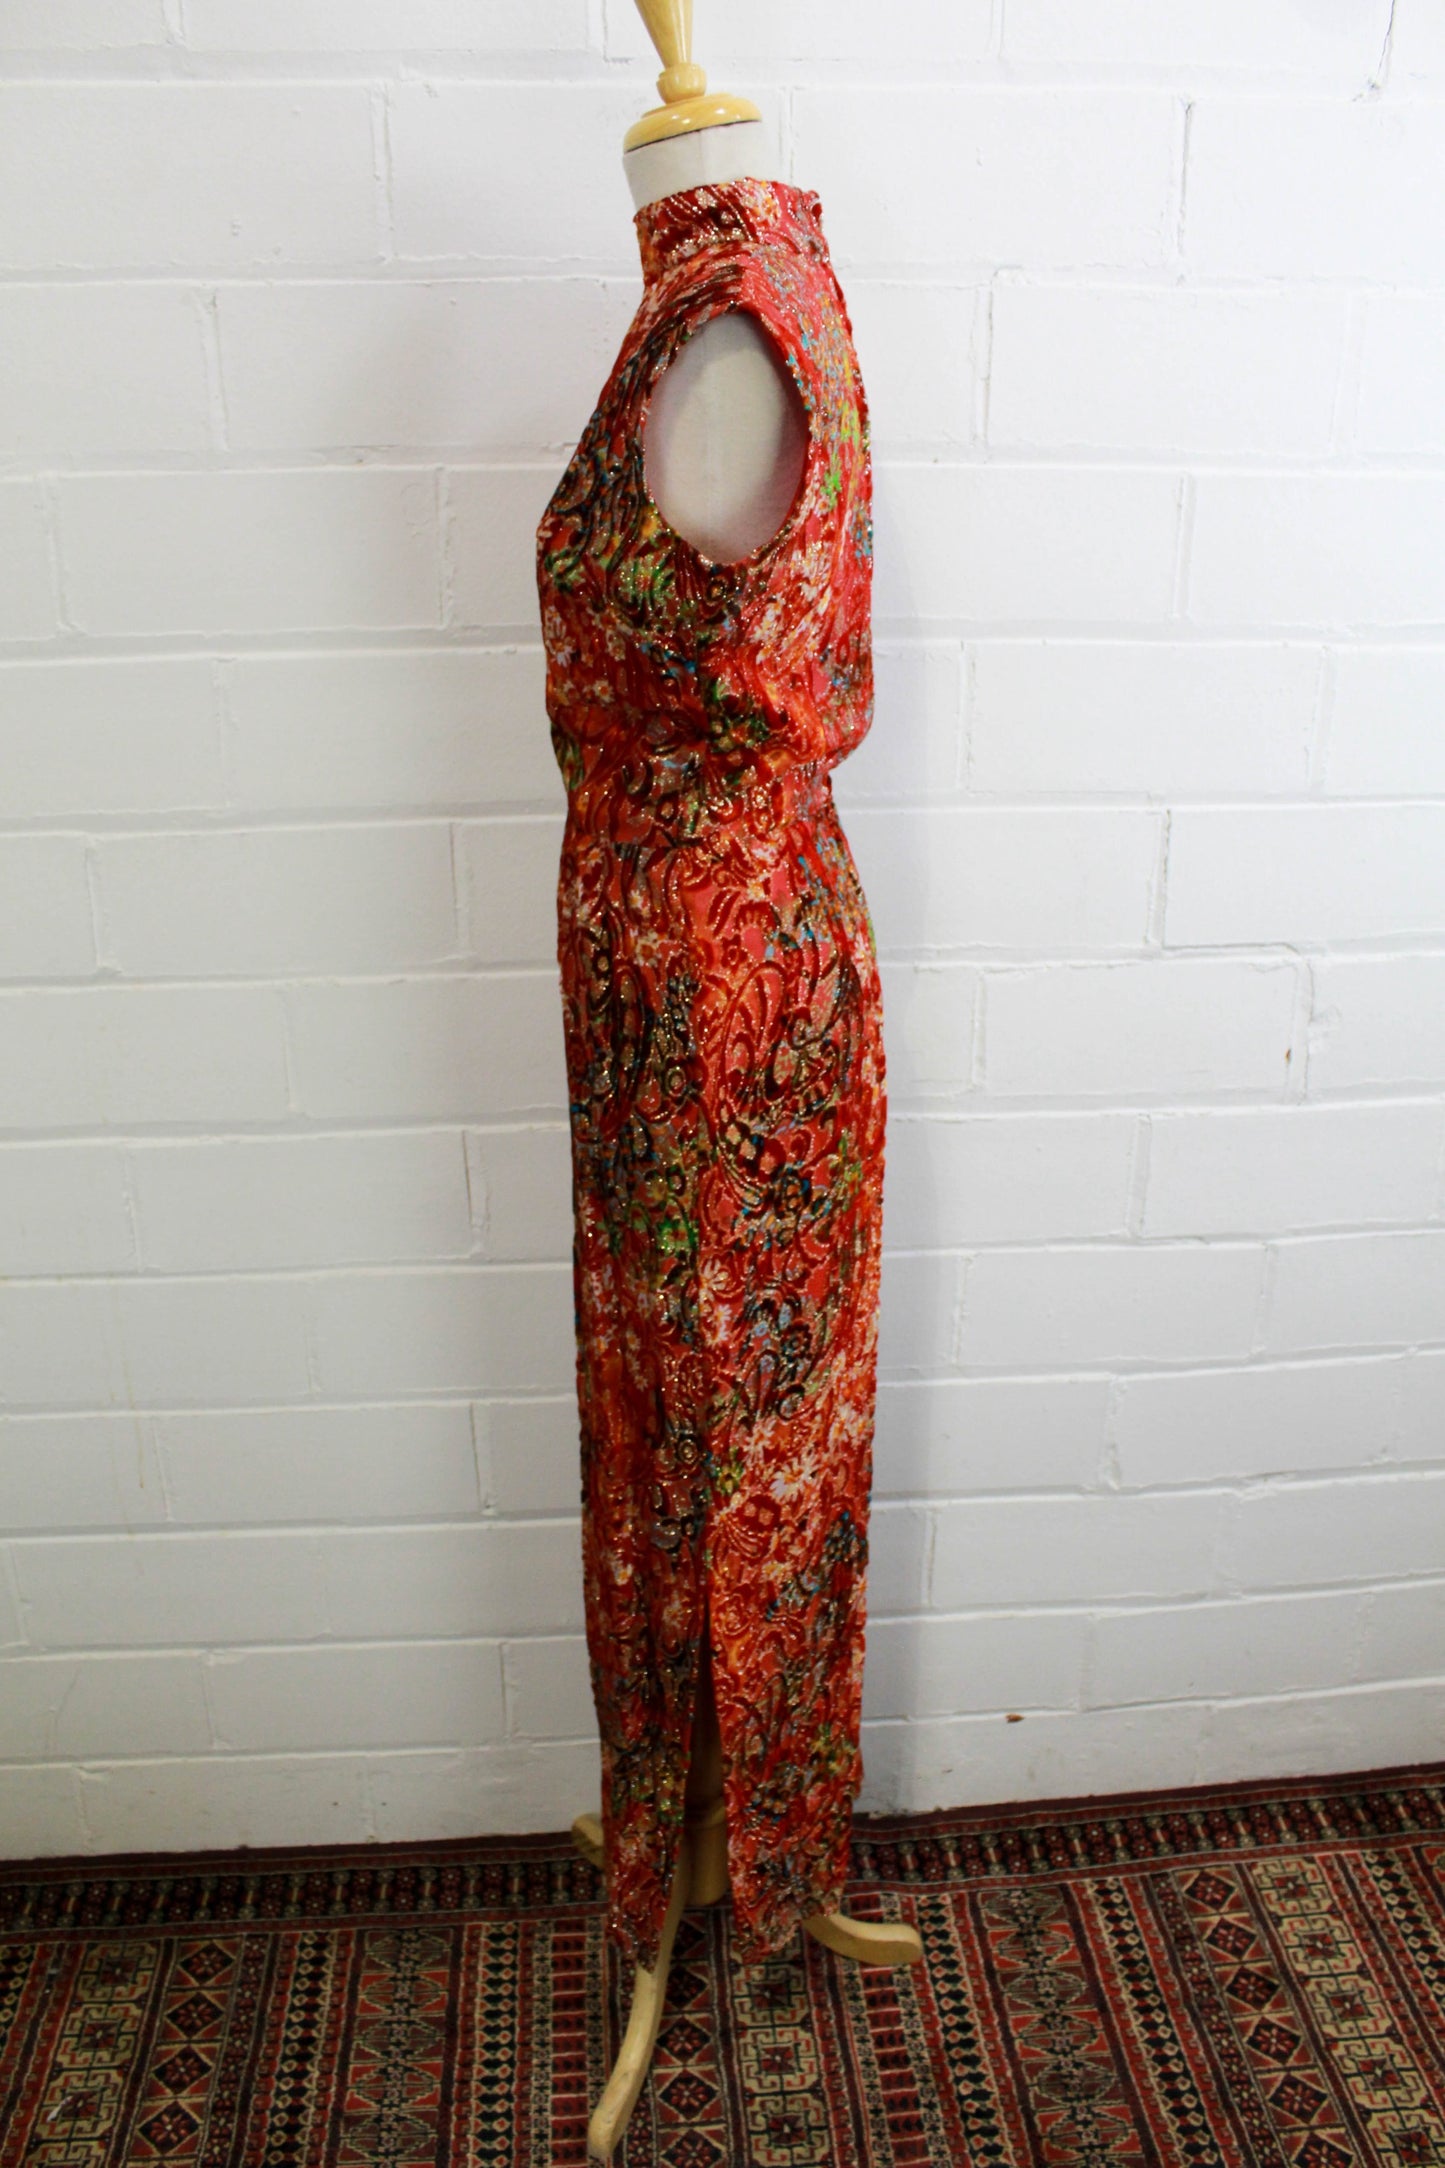 70s maxi dress red and gold velvet metallic floral print side view